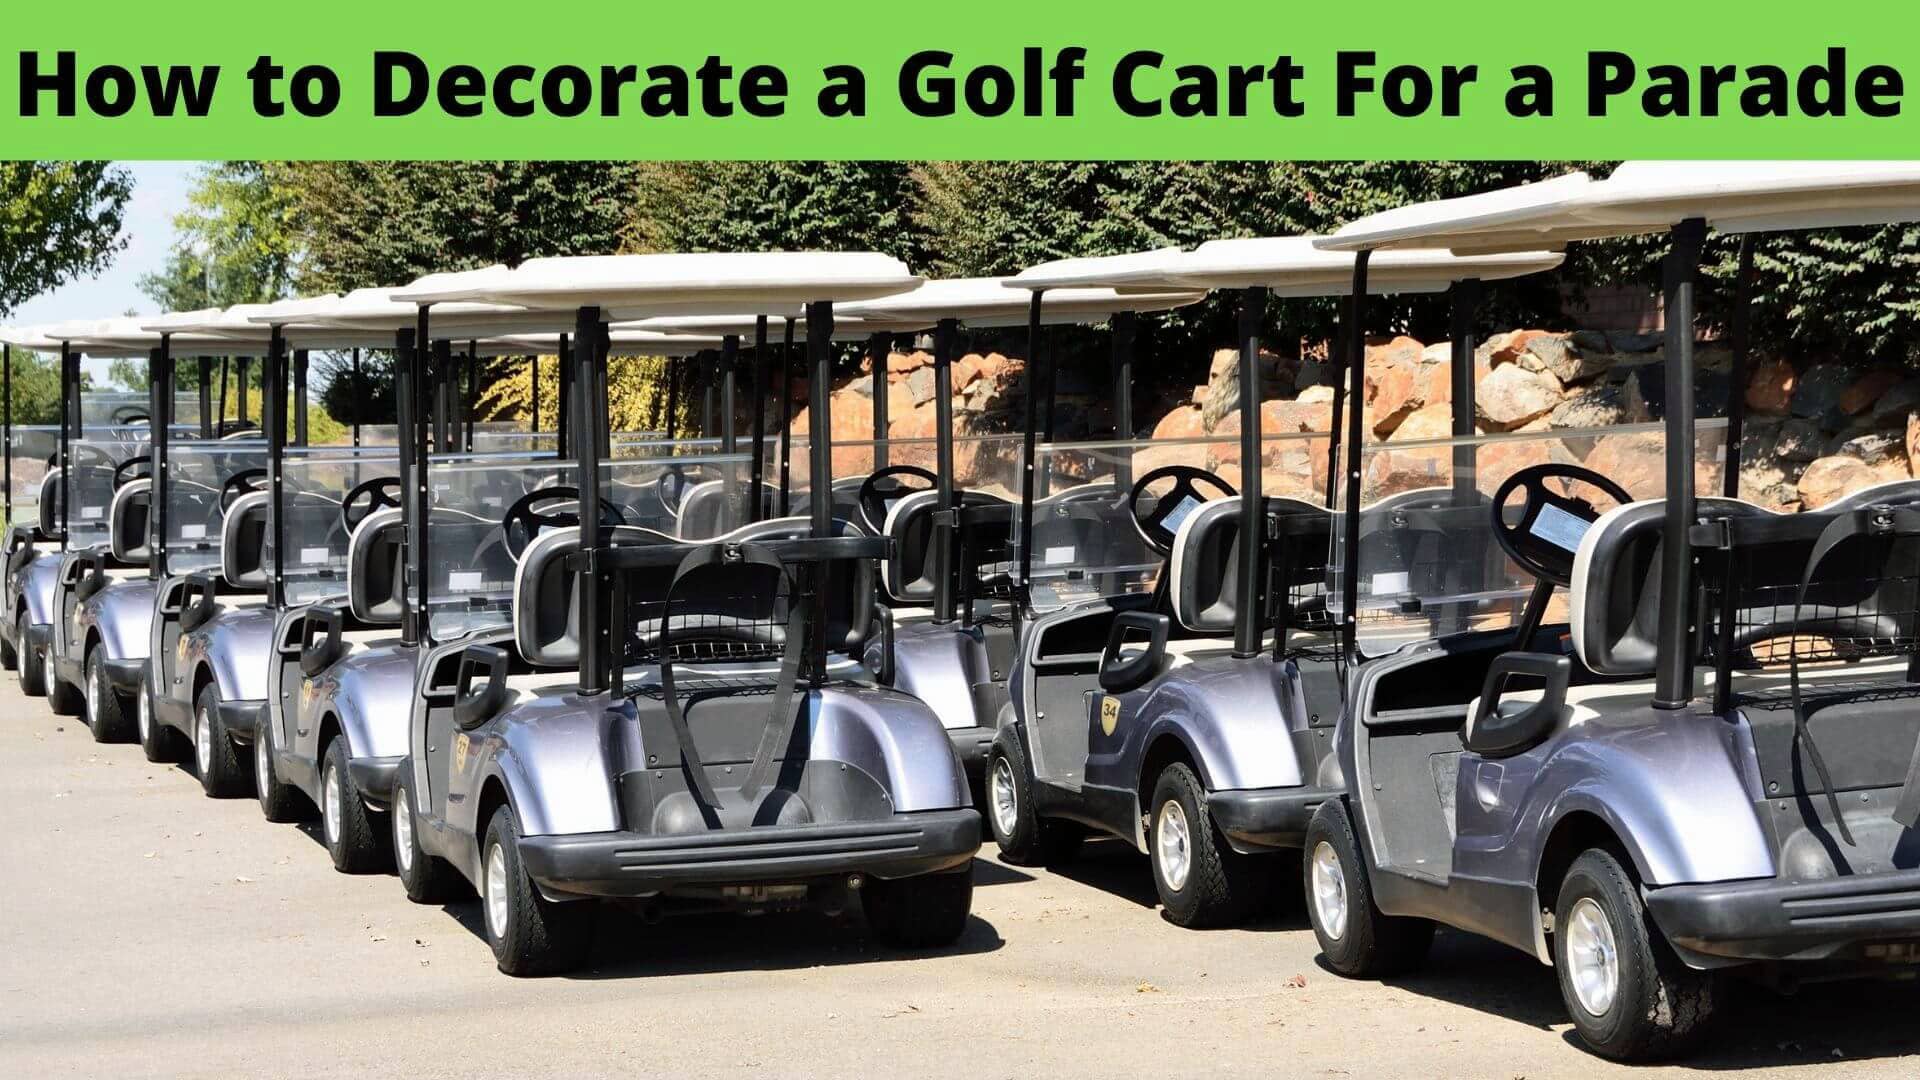 How to Decorate a Golf Cart For a Parade